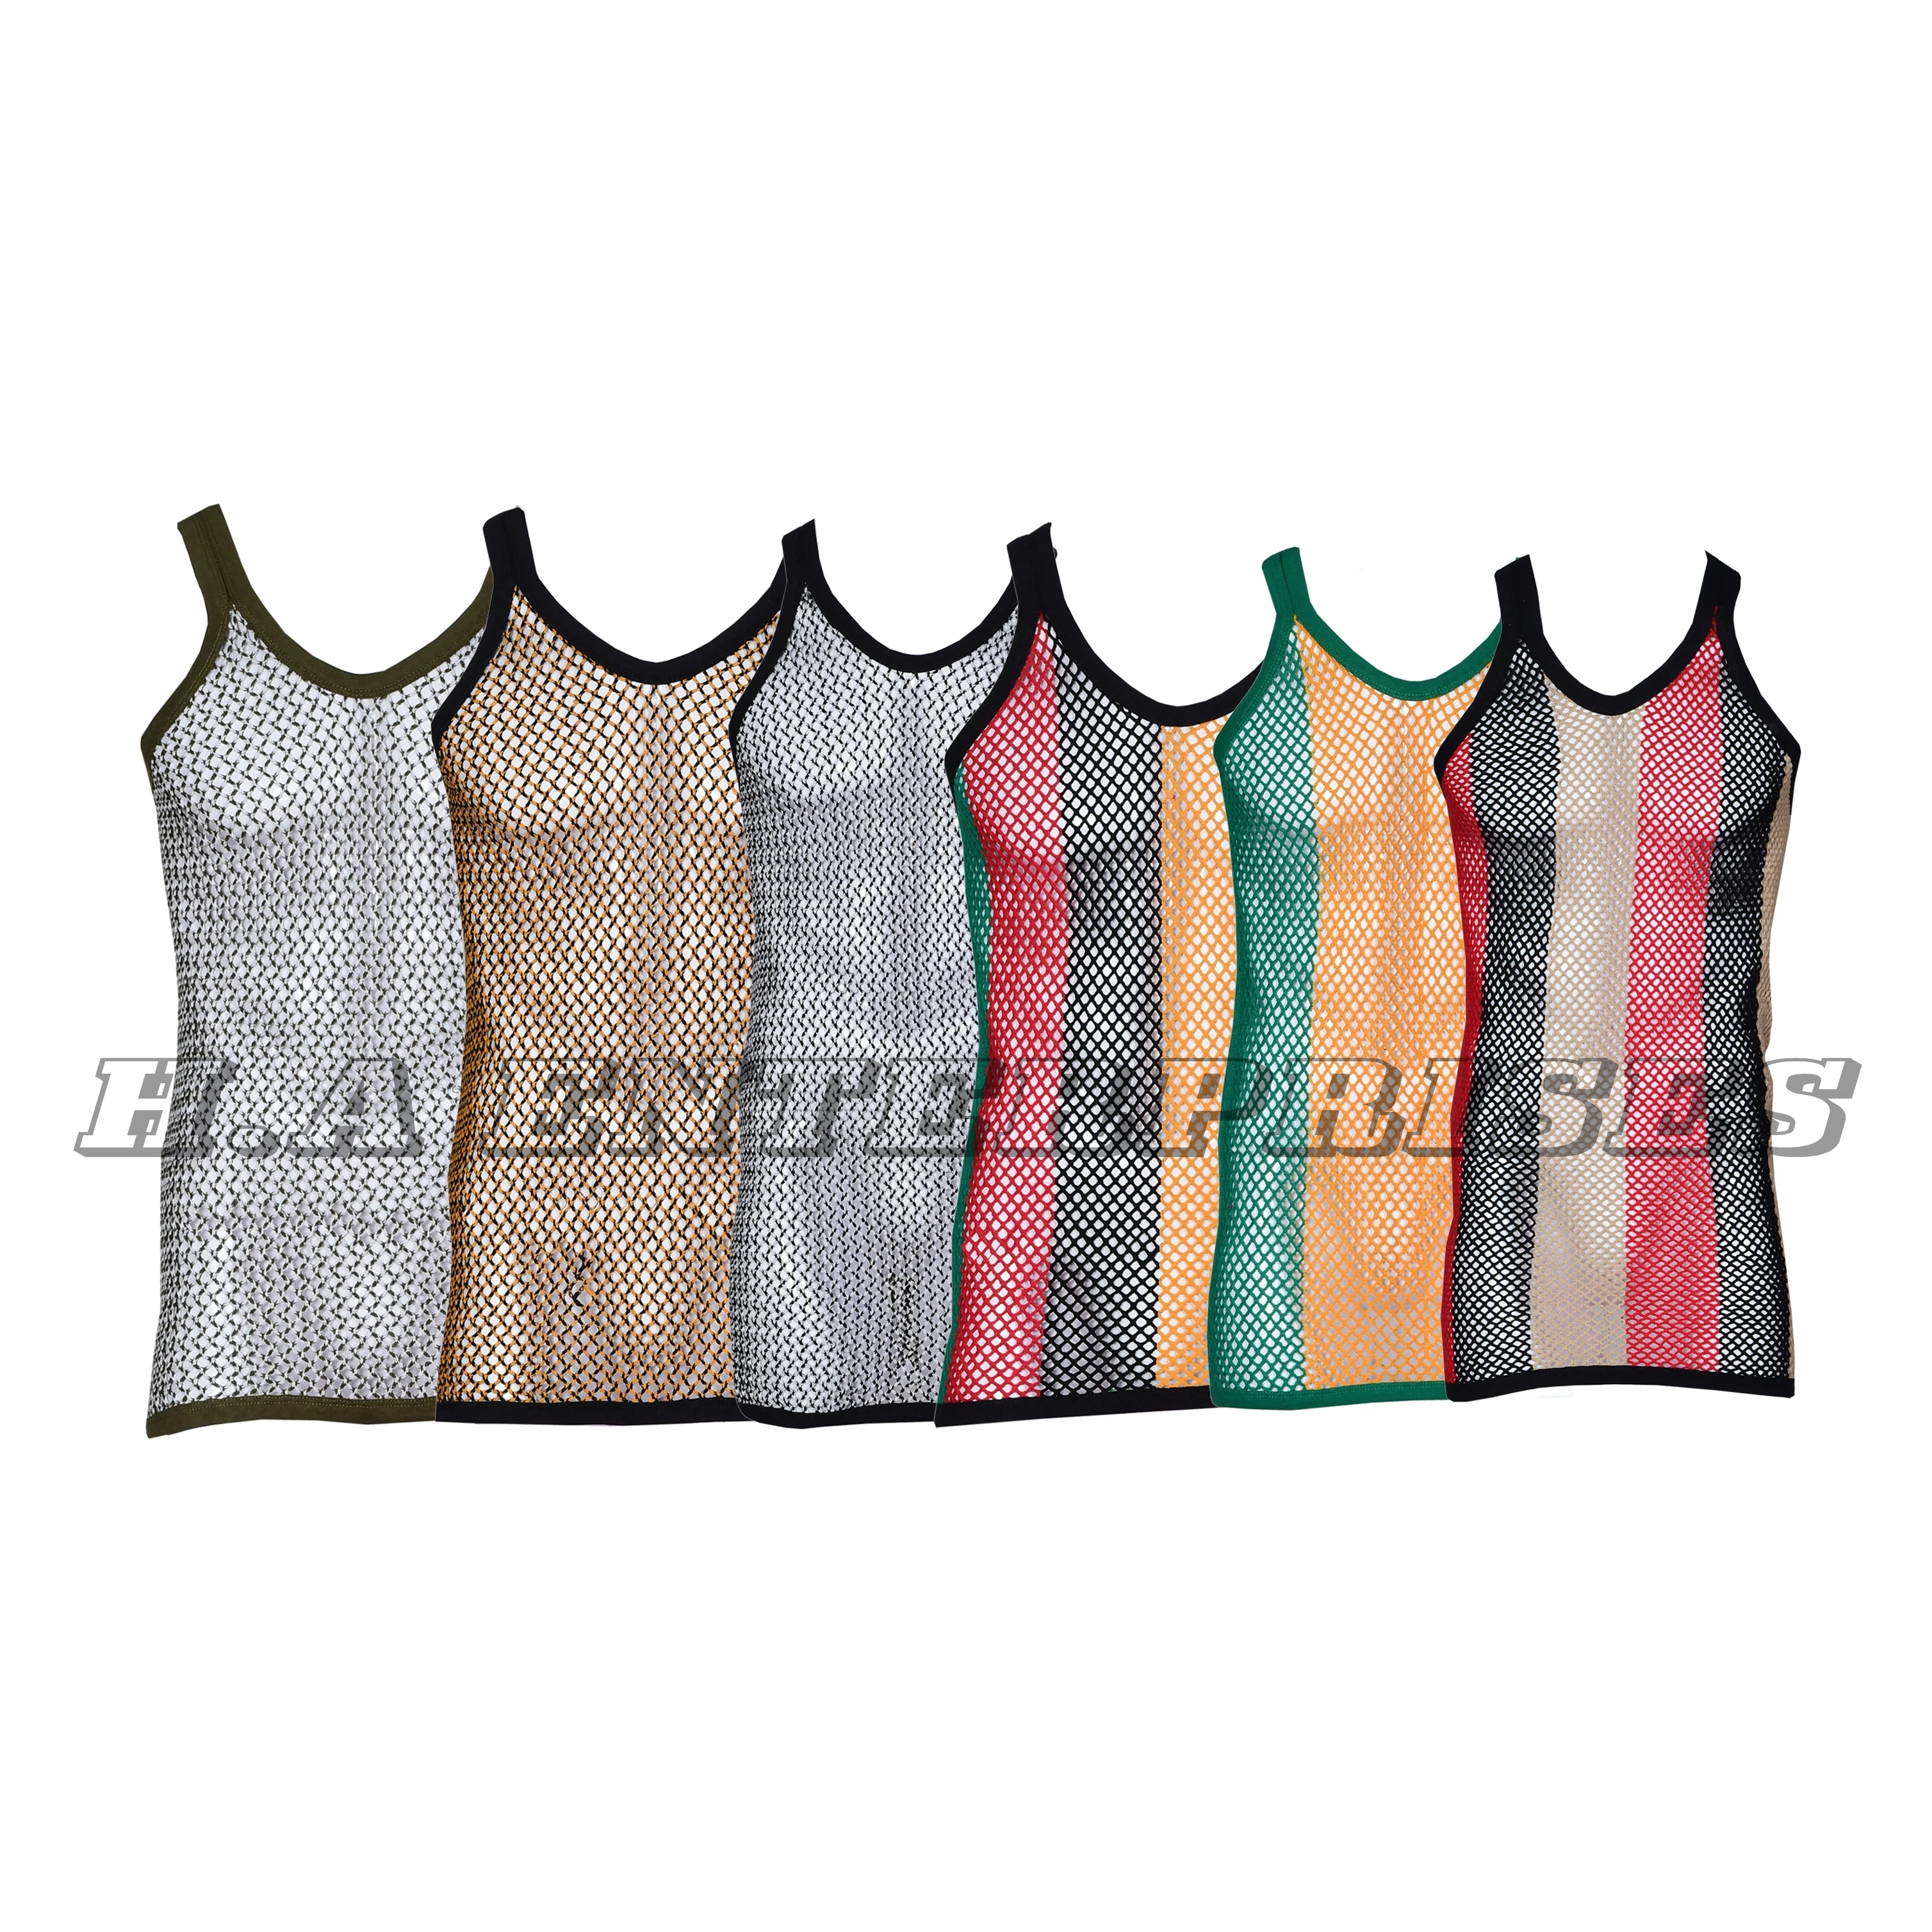 Details about   Kids 100% Cotton Club Star Mesh Fishnet Fitted String Vest For Childrens 